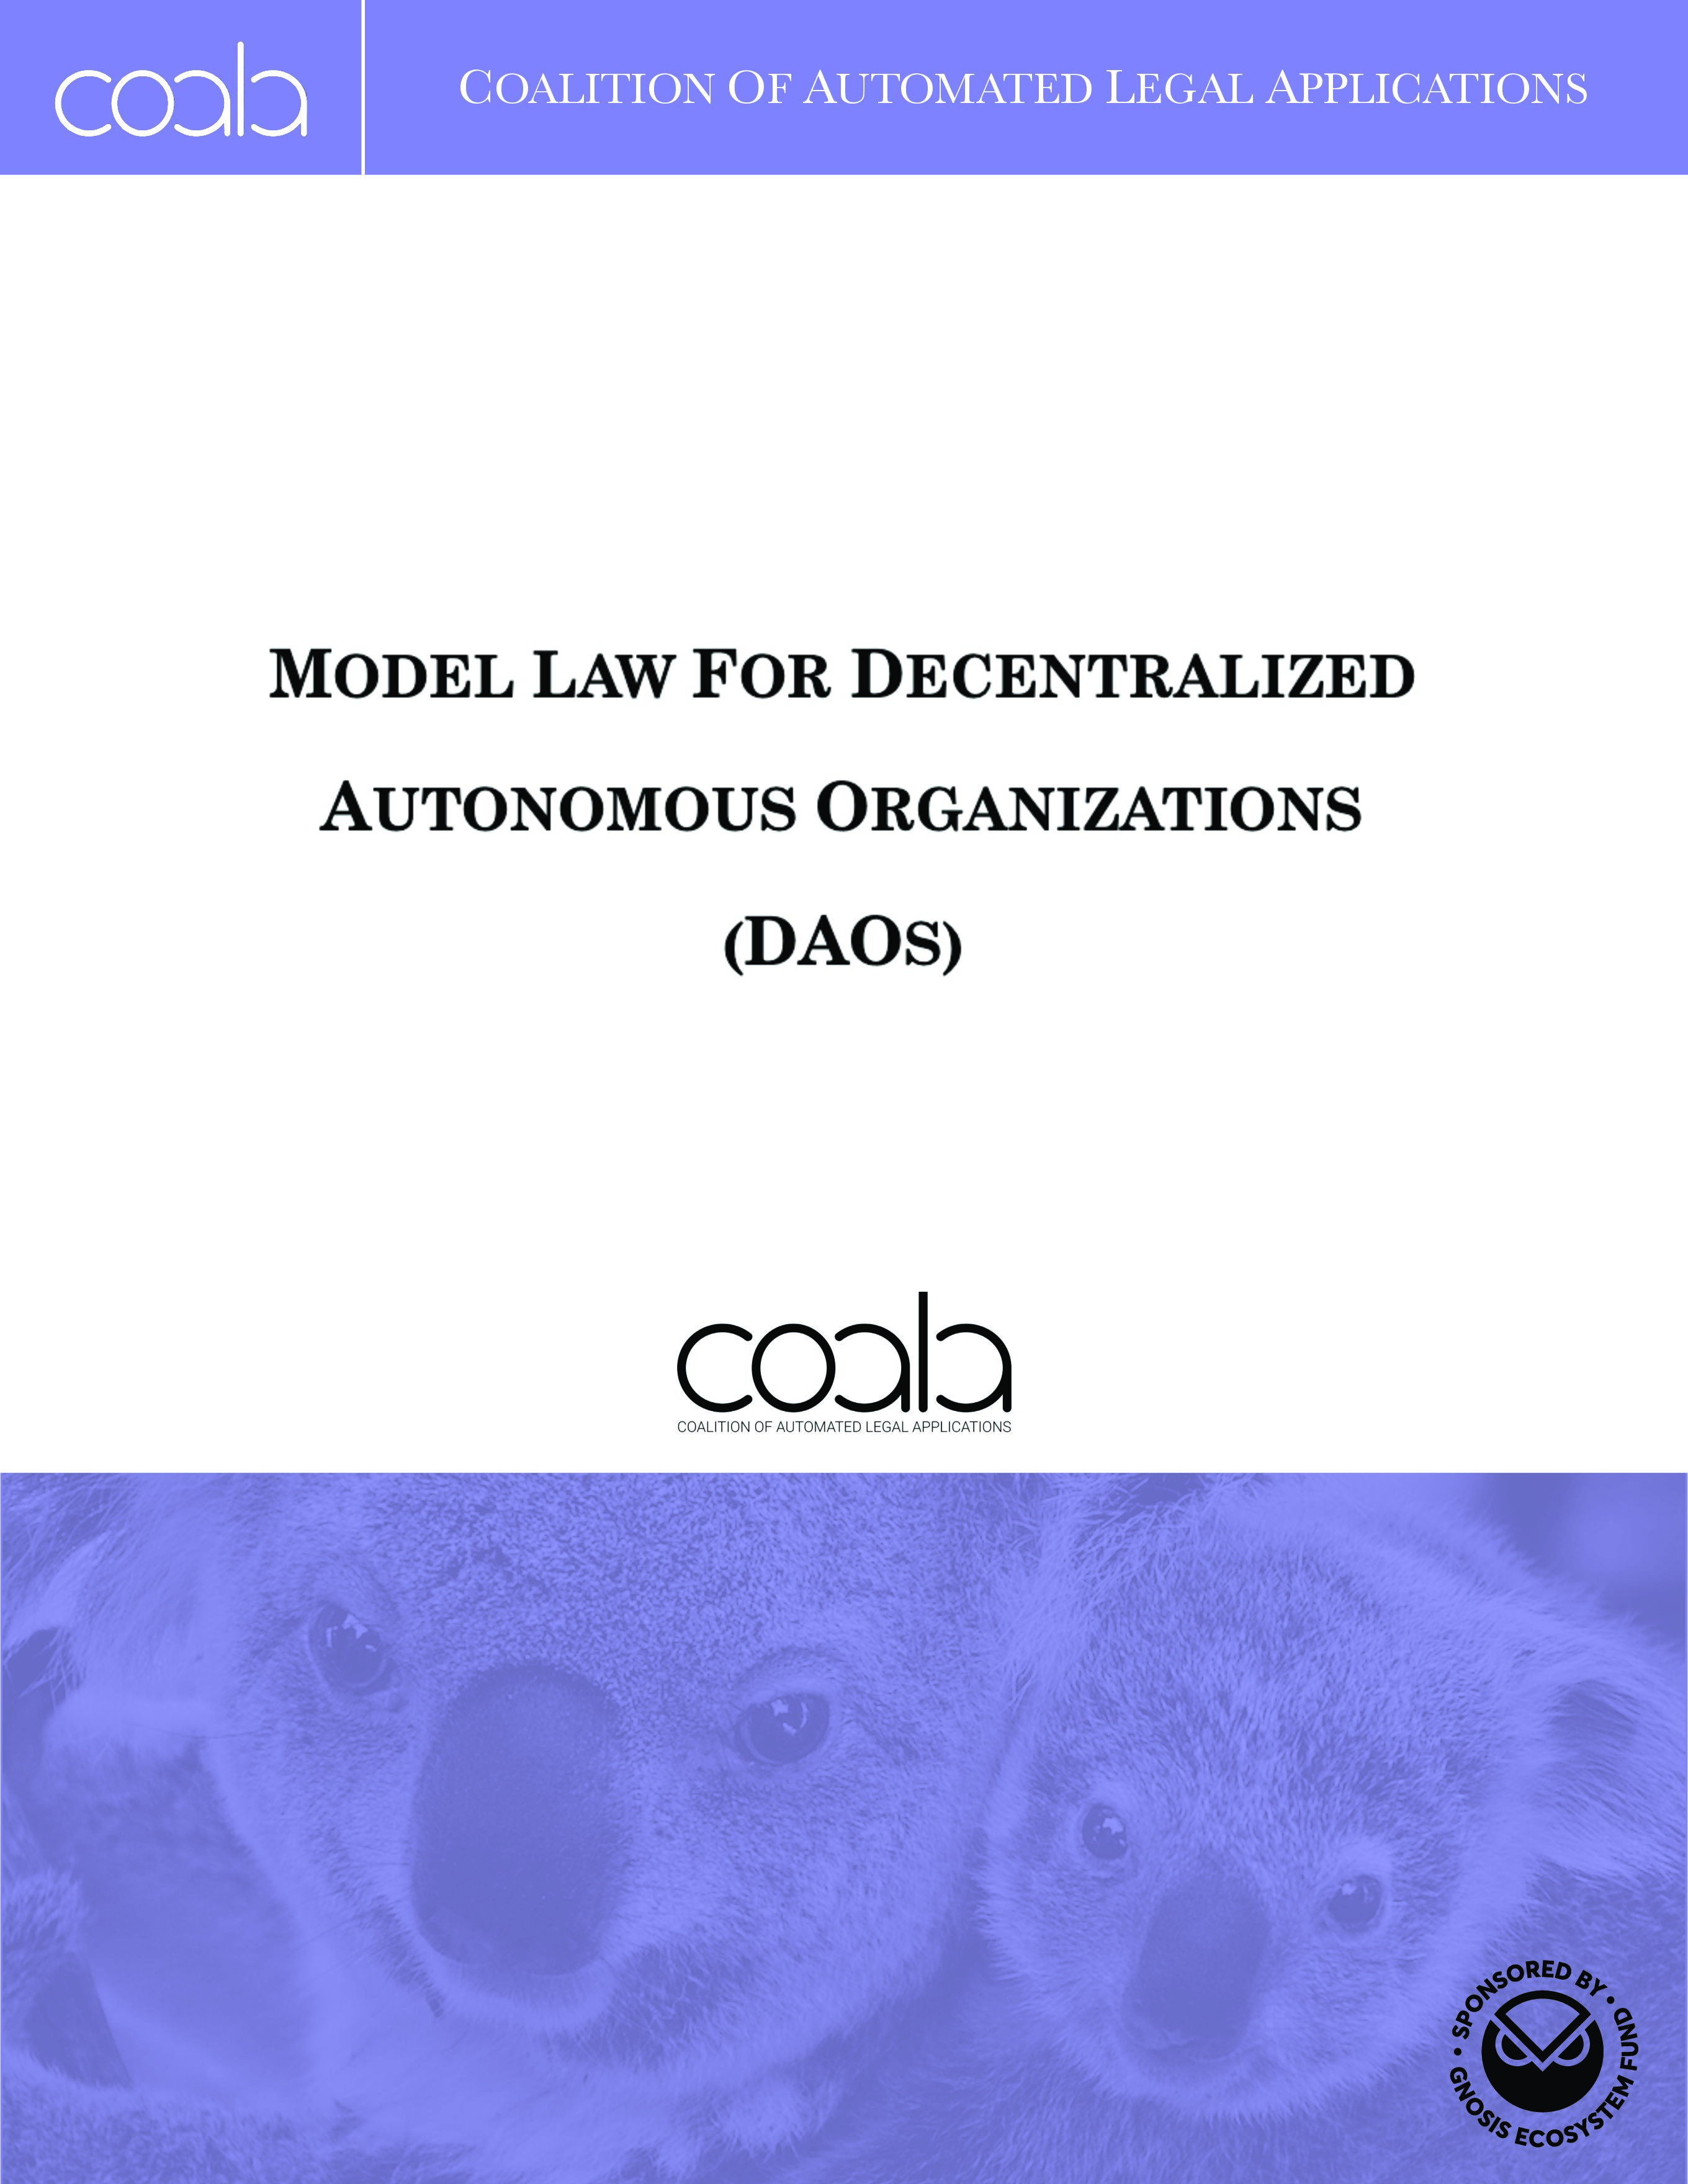 Model Law for DAOs